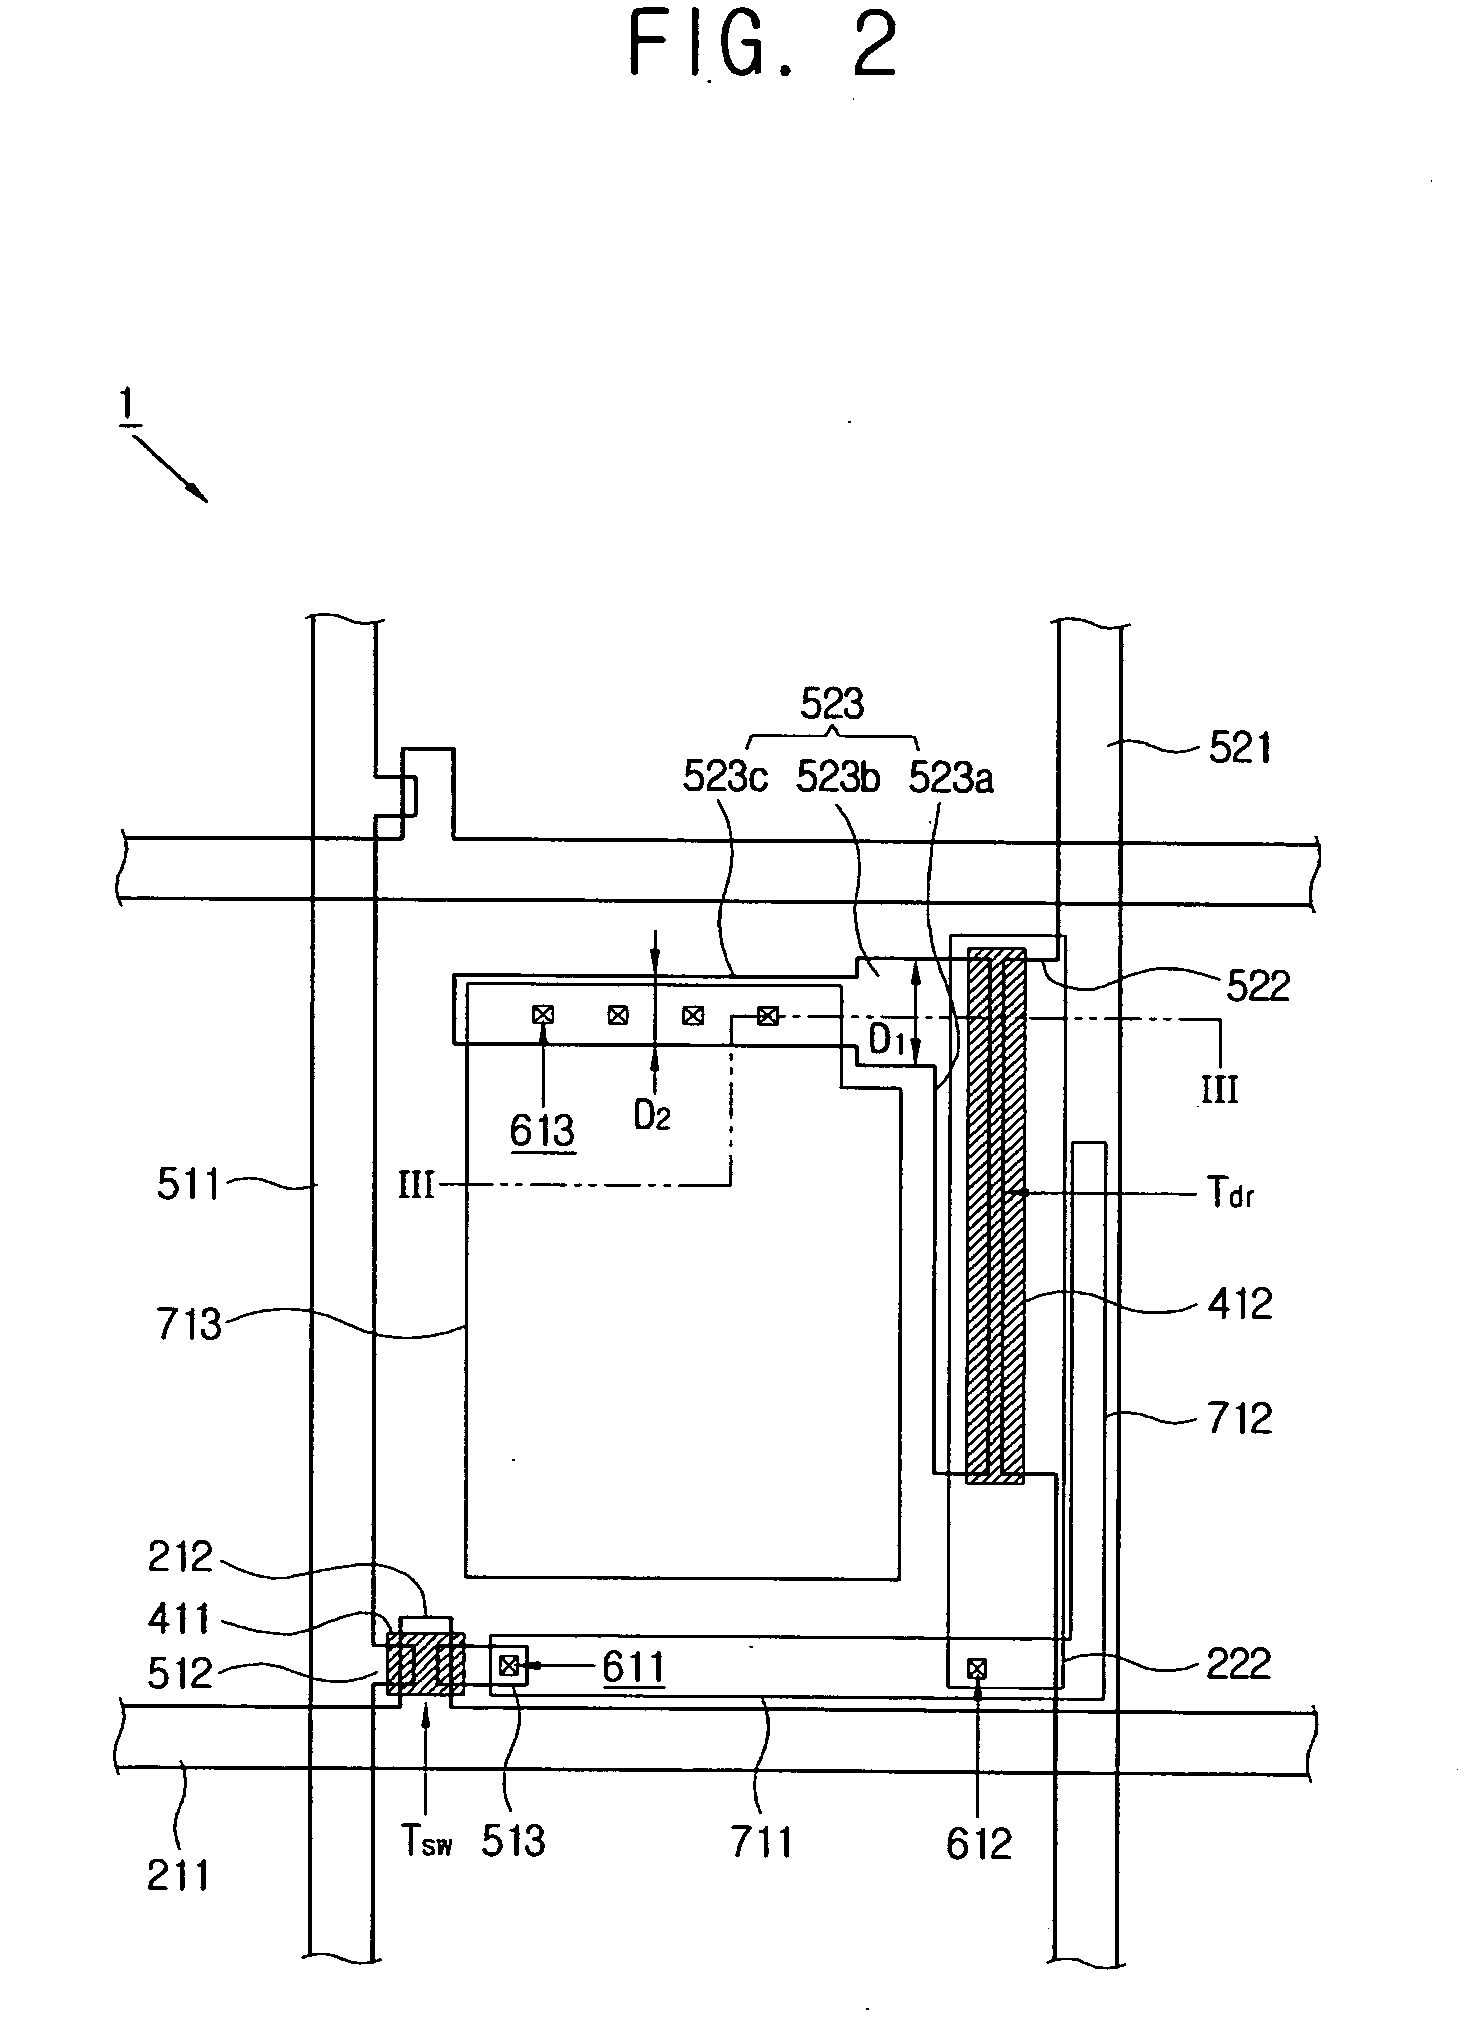 Fixing a pixel defect in display device